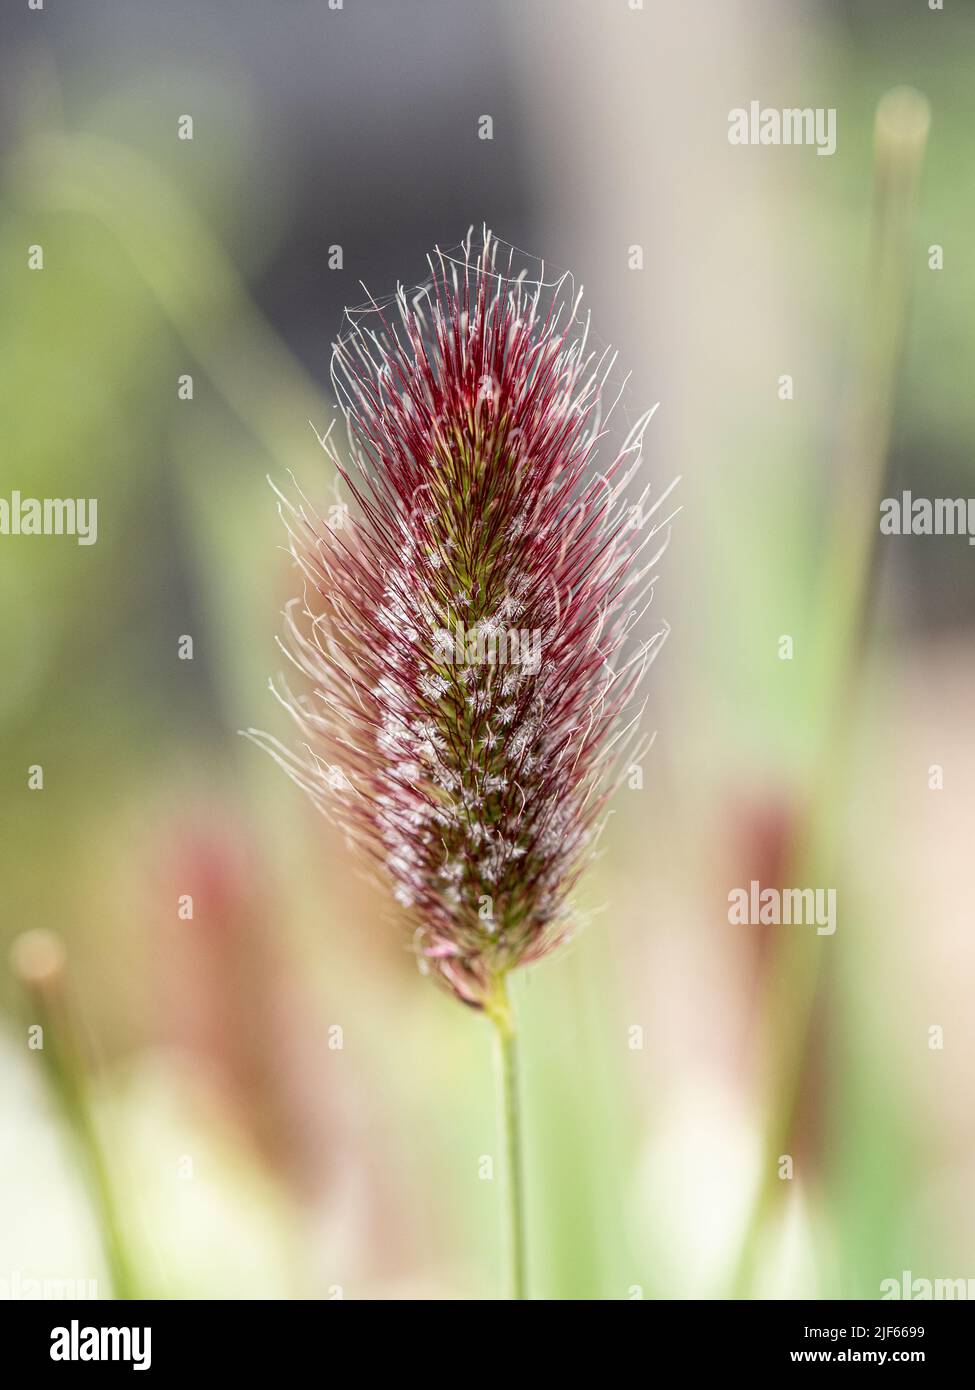 A close up of a single flower spike of Pennisetum thunbergii 'Red Buttons' showing the distinctive red tinging. Stock Photo